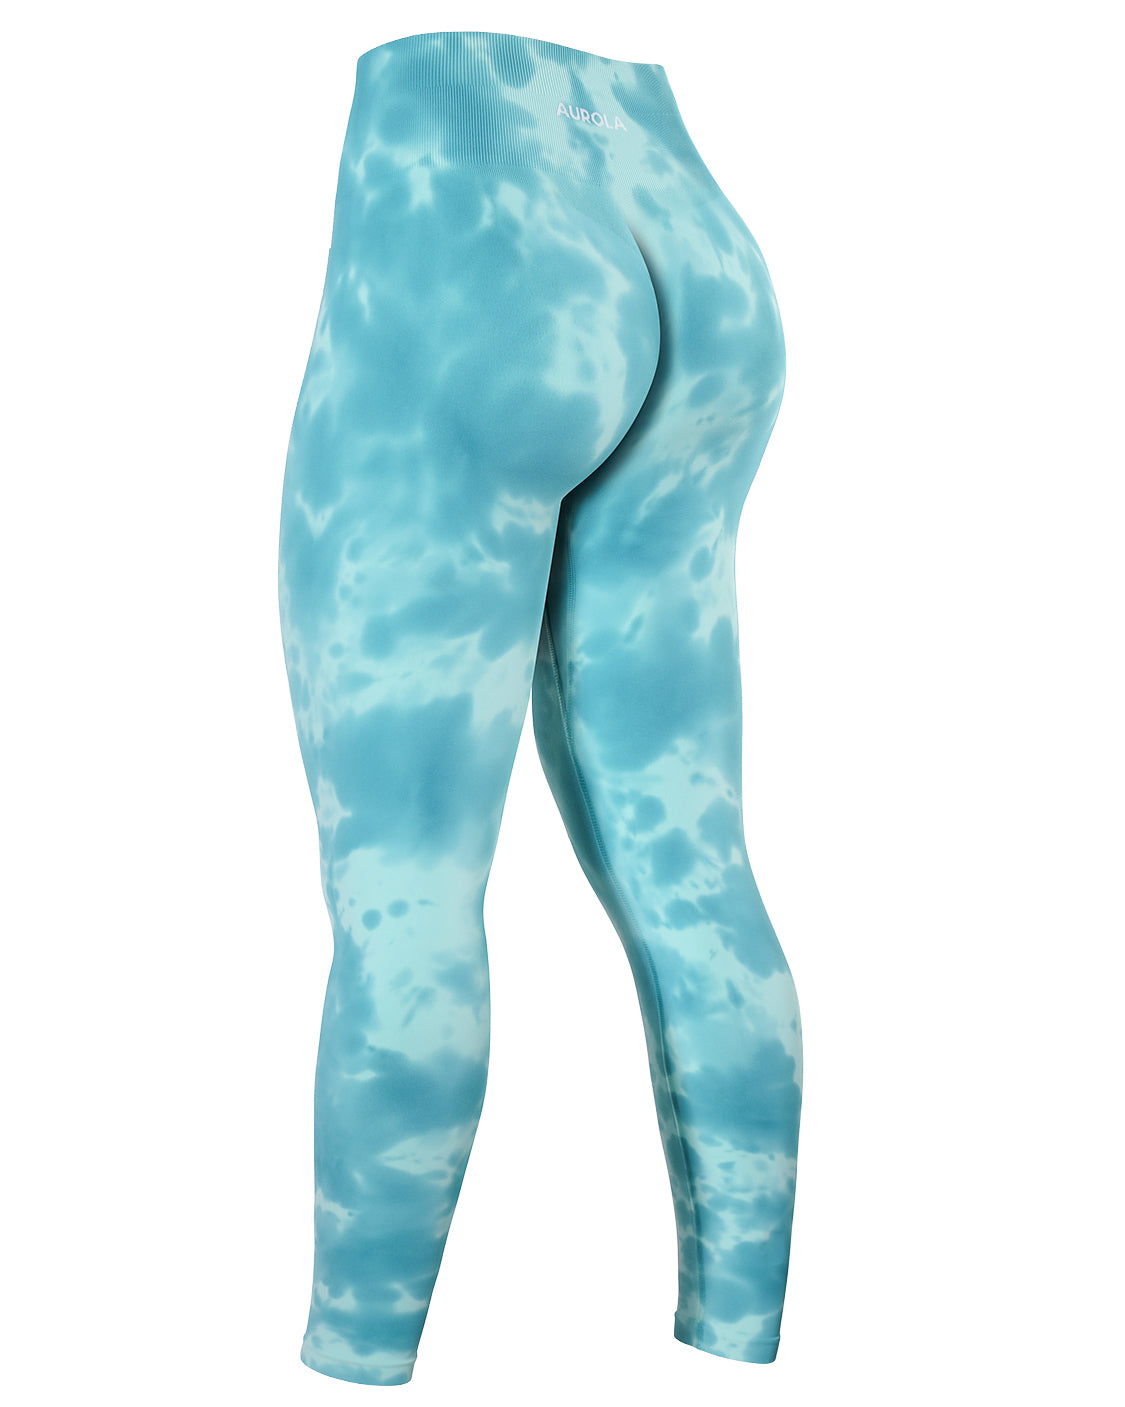 Colorfulkoala - Did you know our Tie Dye High Waisted Leggings are made  with added LYCRA ® SPORT fiber that's engineered to provide exceptional  recovery power and freedom of movement? Because they